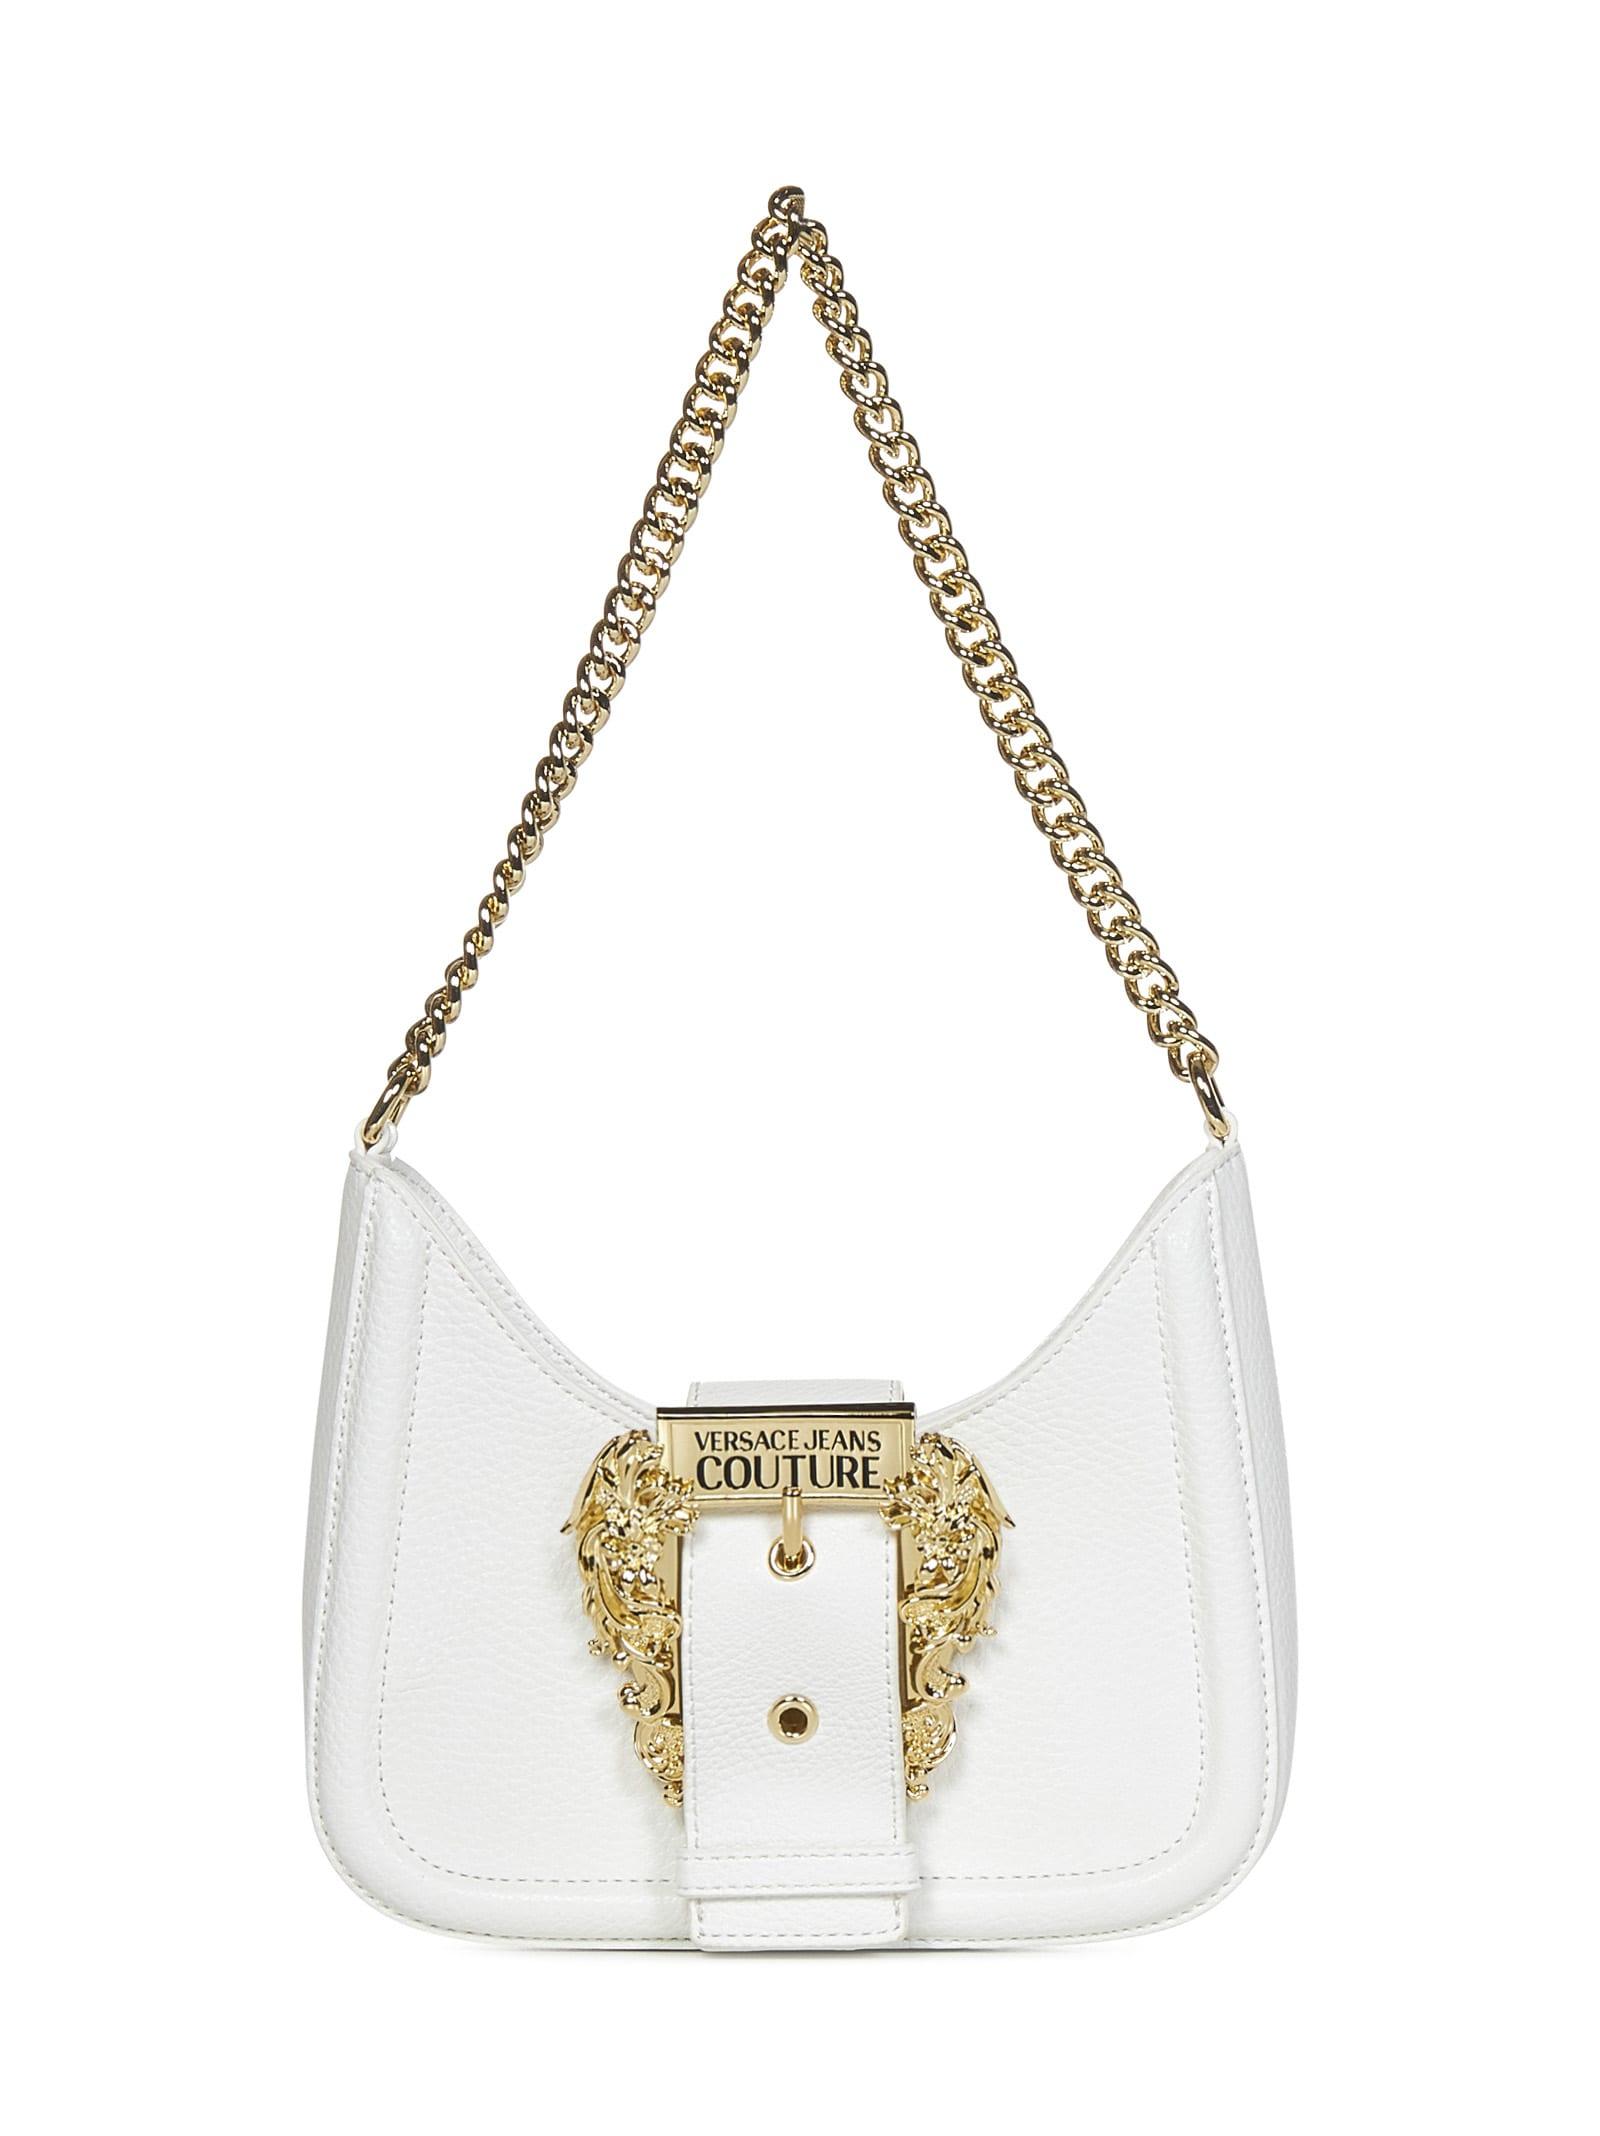 Versace Couture Shoulder Bag in White |